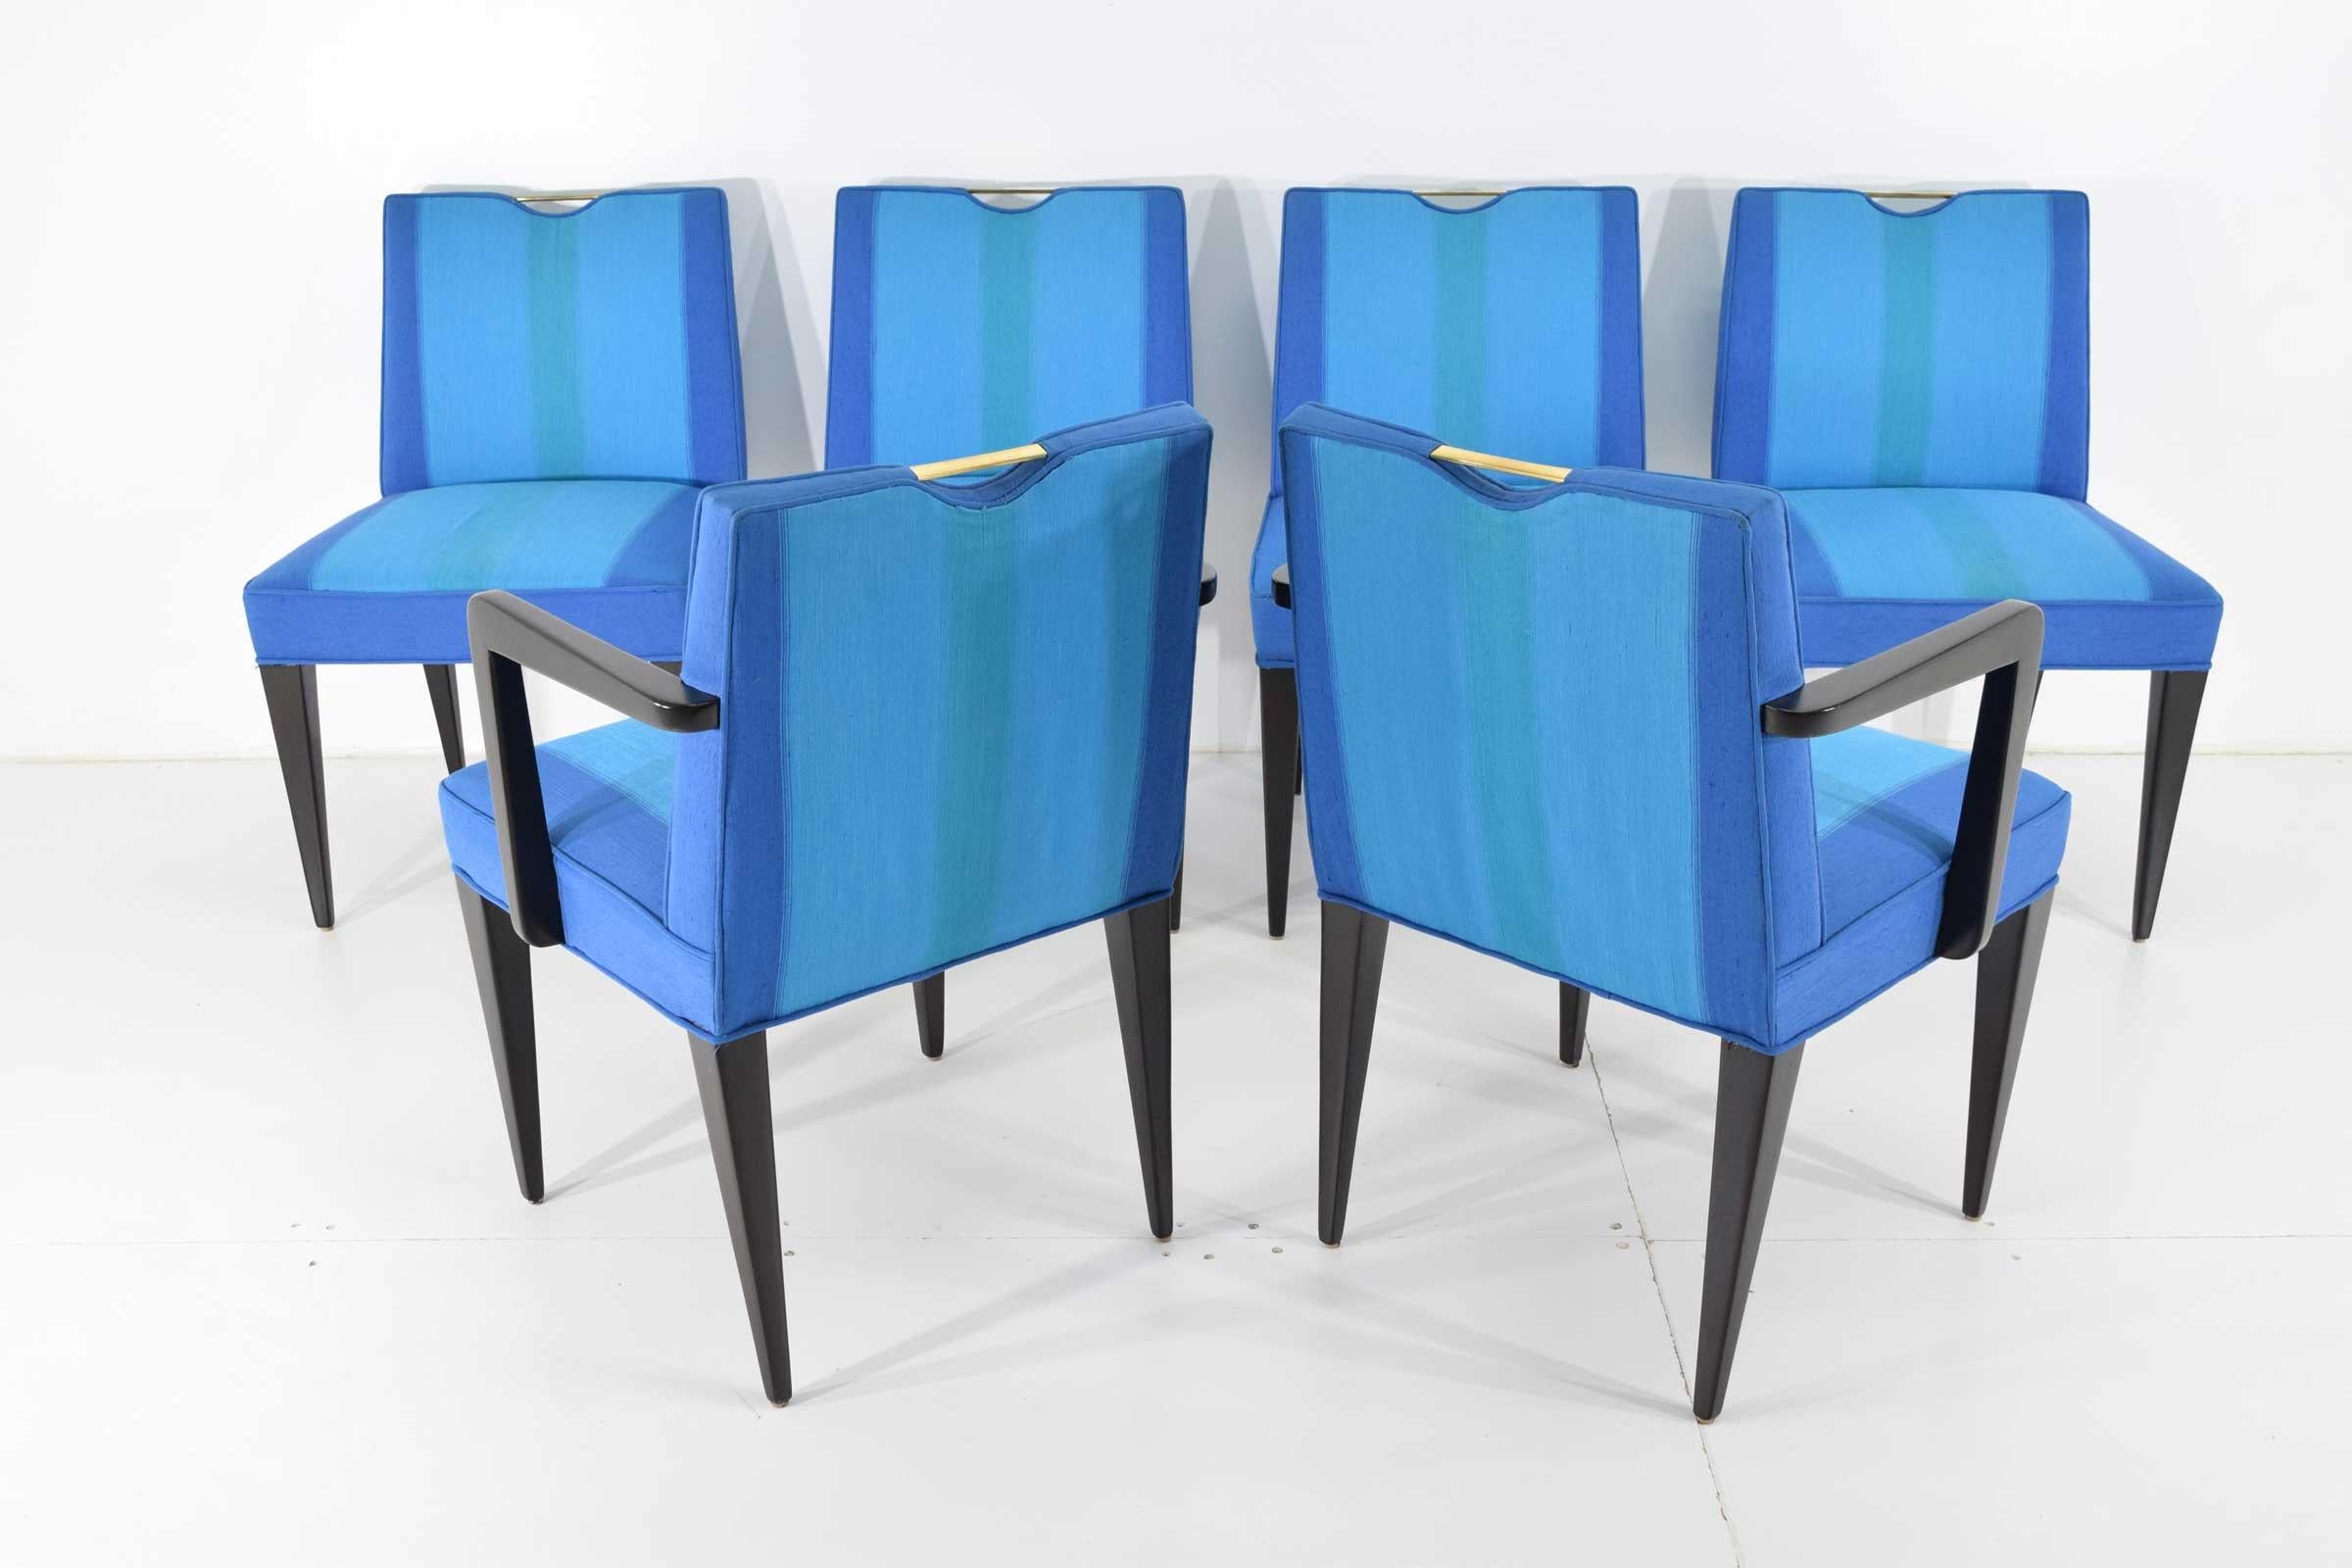 Models 4592 (armless) and Model 4593 (armed version) dining chairs. designed by Edward J Wormley for Dunbar Furniture Company. The chairs have a brass handle on the back, mahogany legs and bright upholstery. Not sure if upholstery is original but it